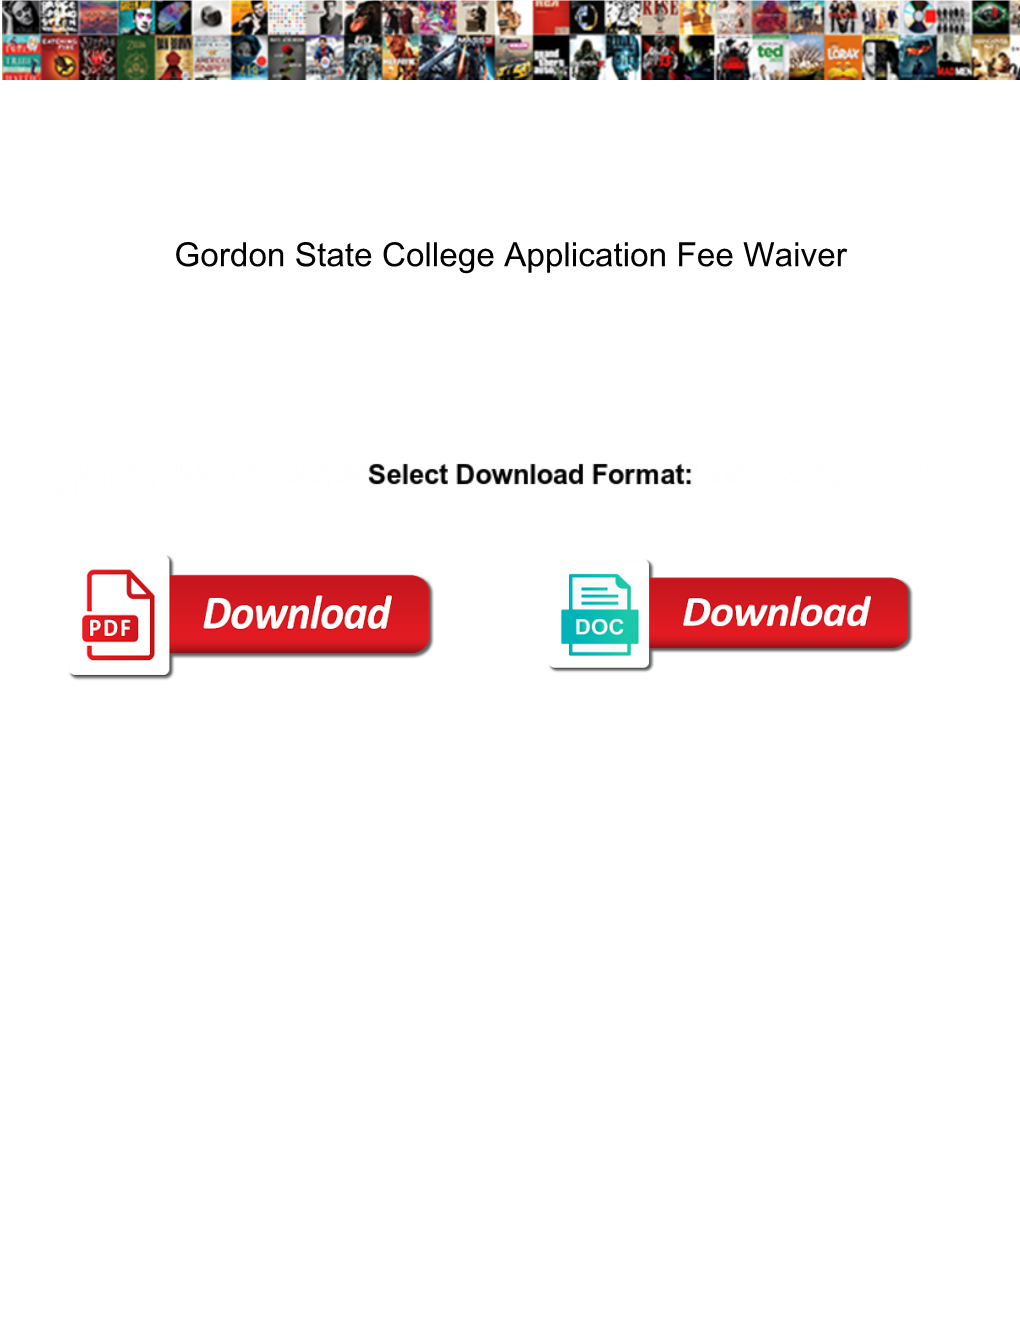 Gordon State College Application Fee Waiver